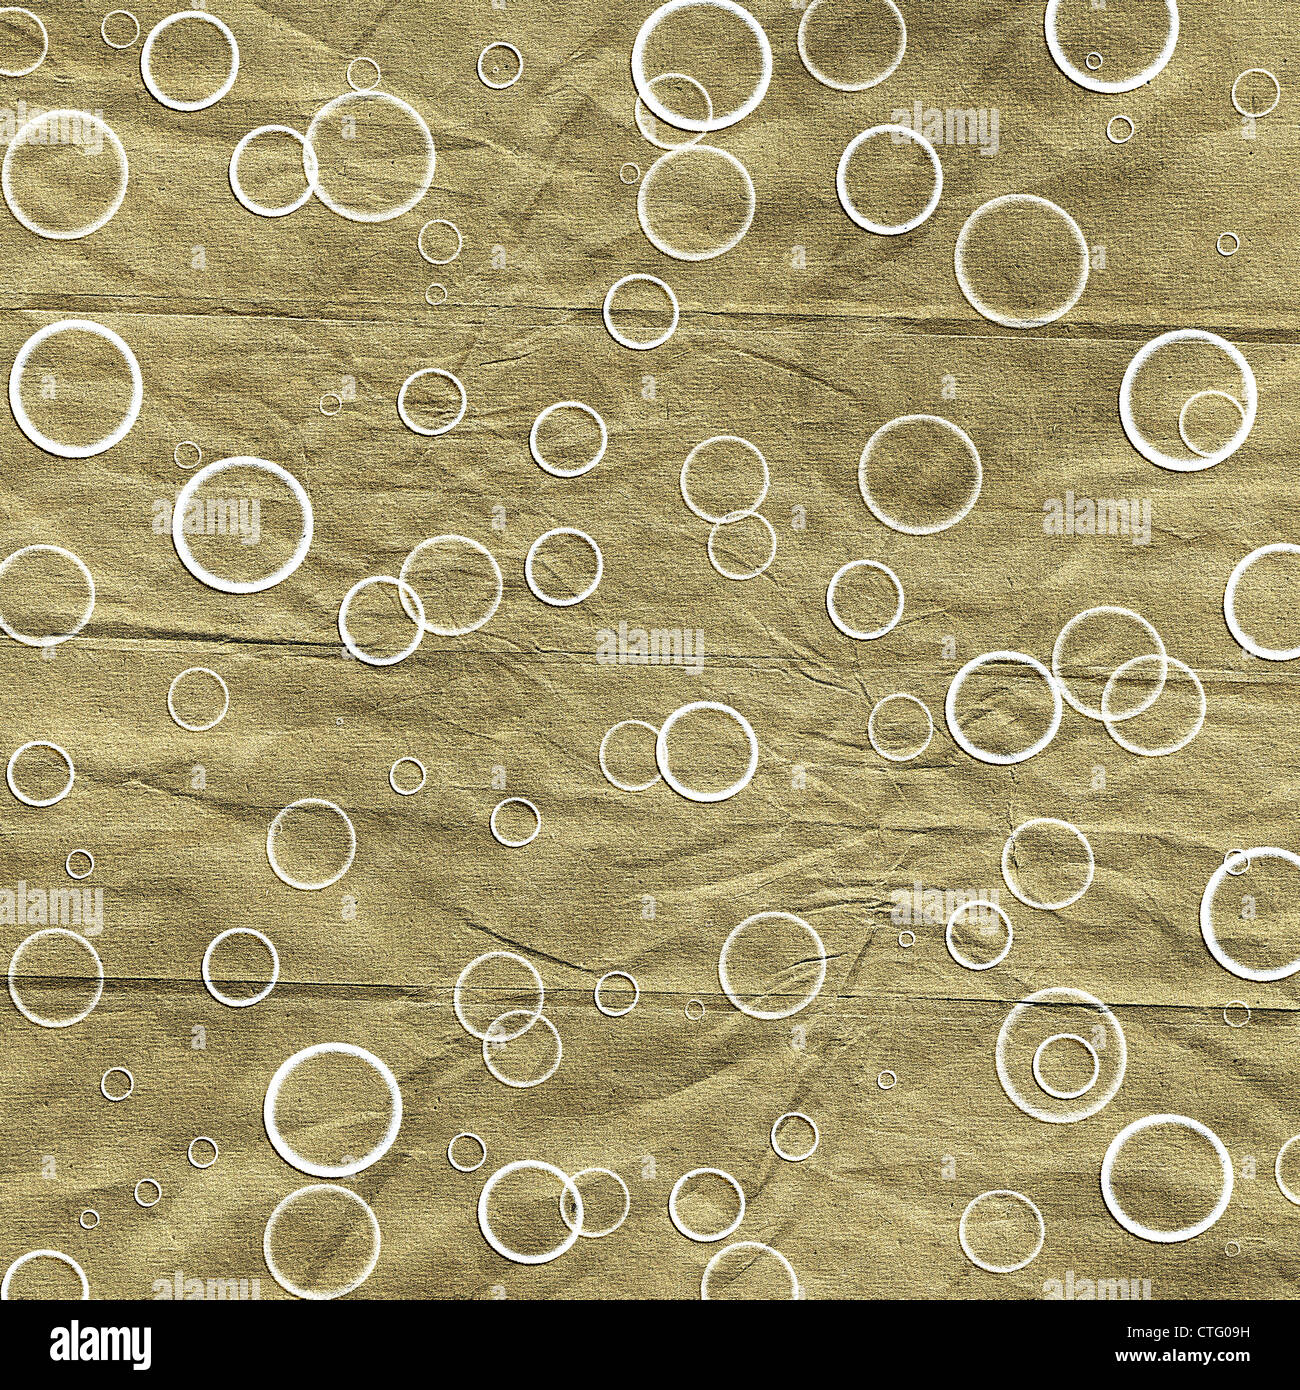 Old crumpled golden paper background with circles Stock Photo